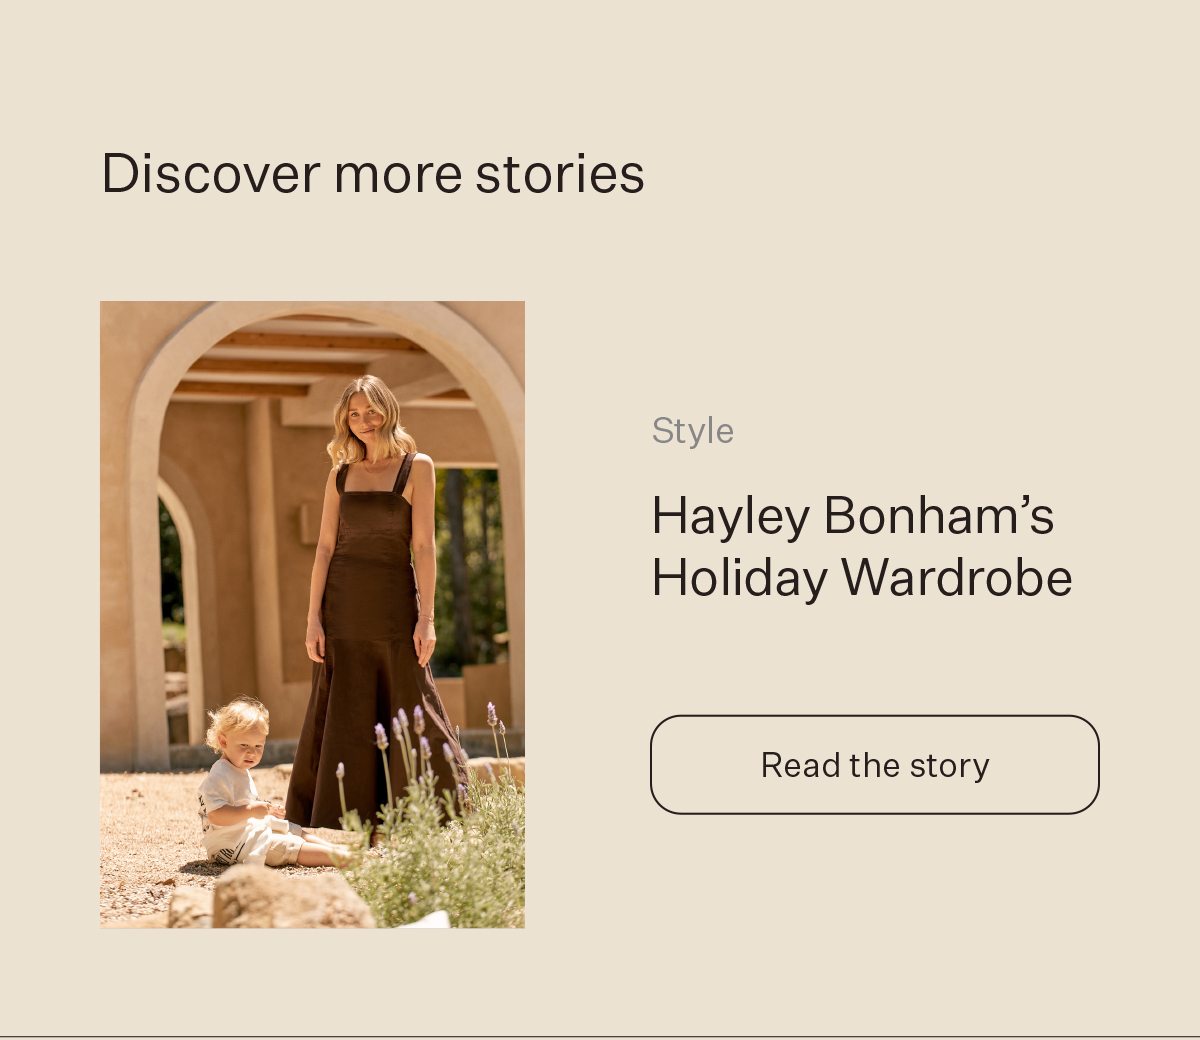 Discover more stories